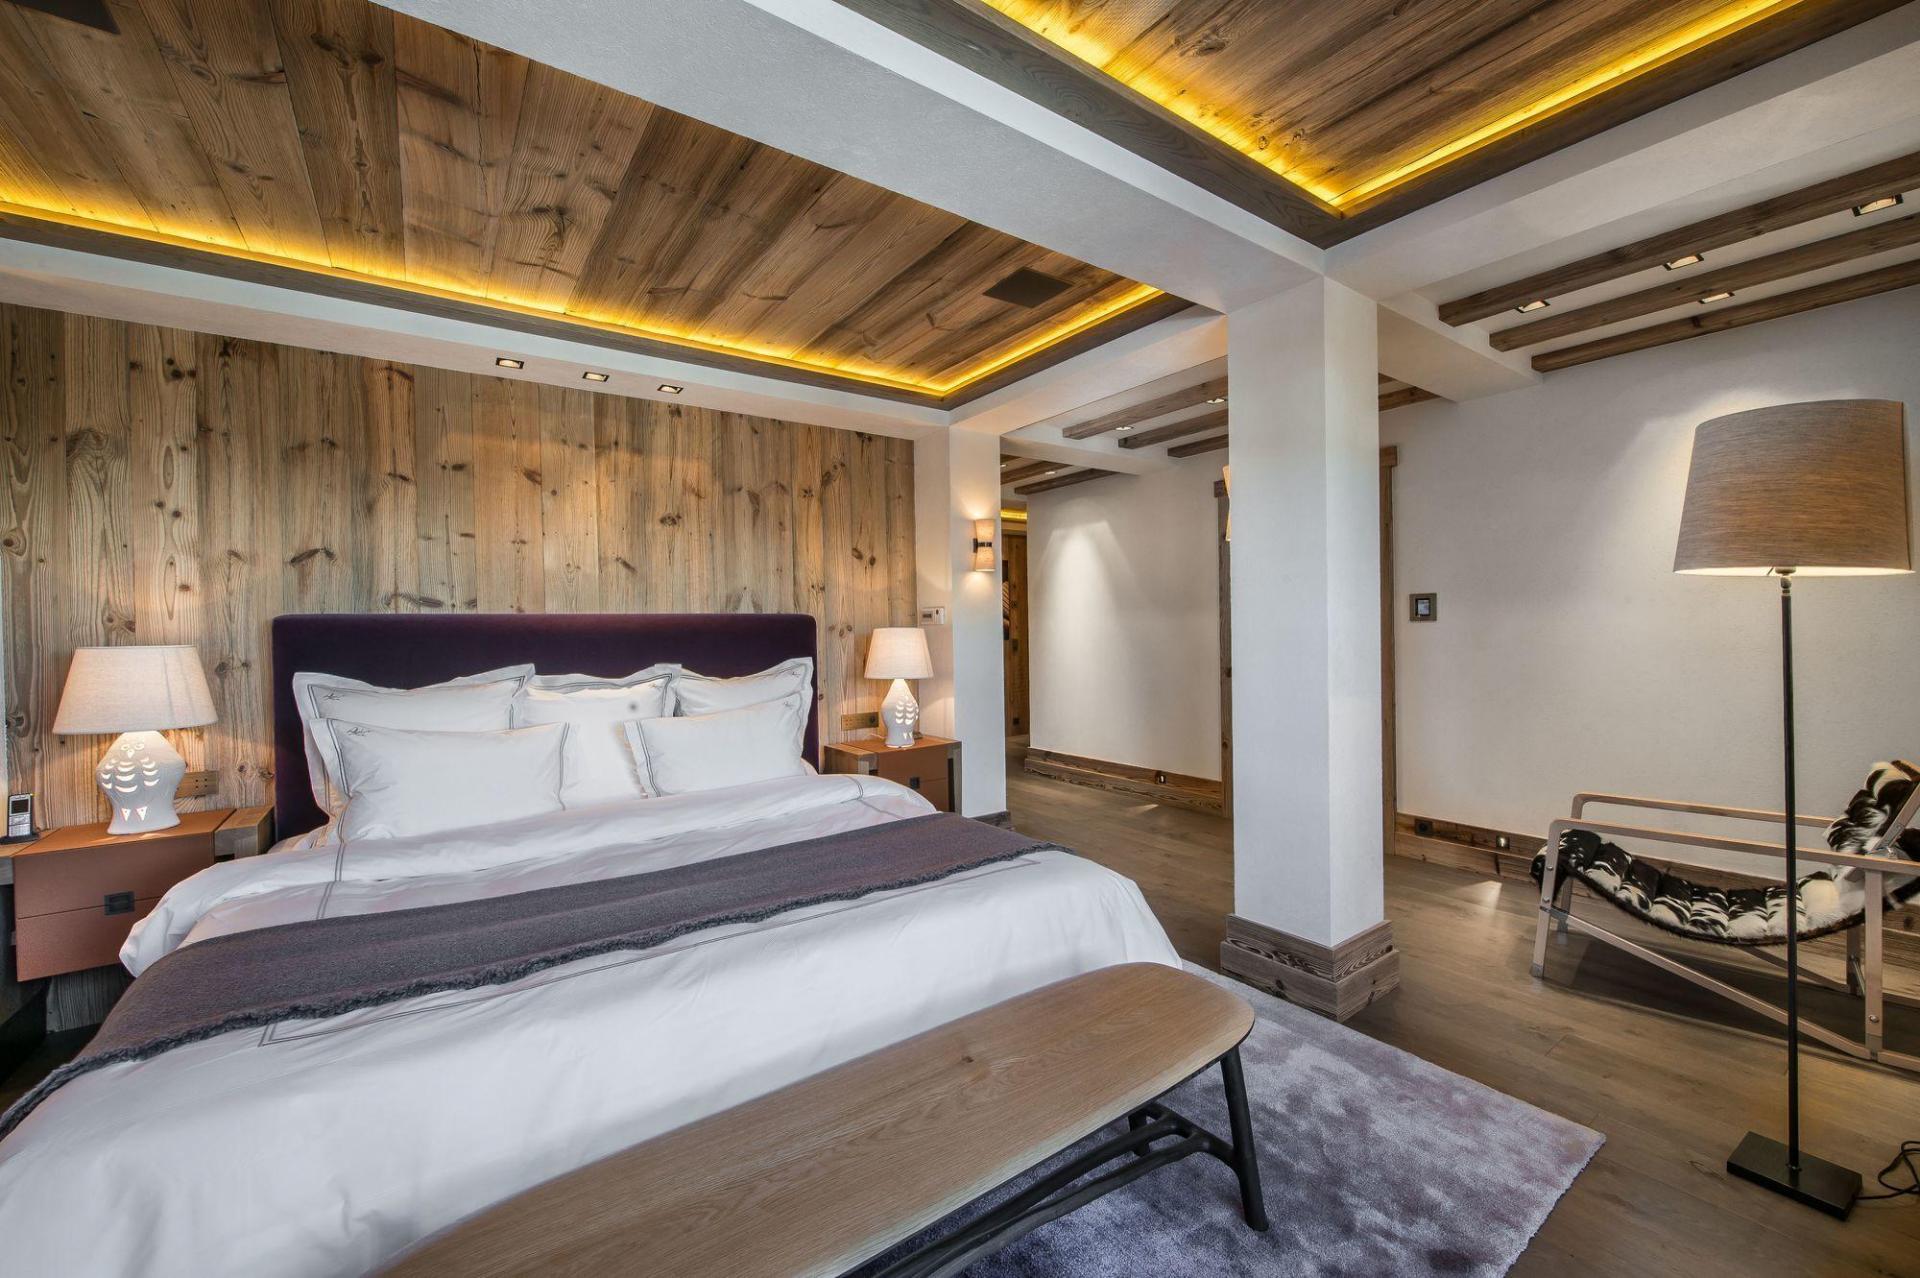 ONE OF THE BEDROOM OF A LUXURY CHALET RENTAL IN COURCHEVEL